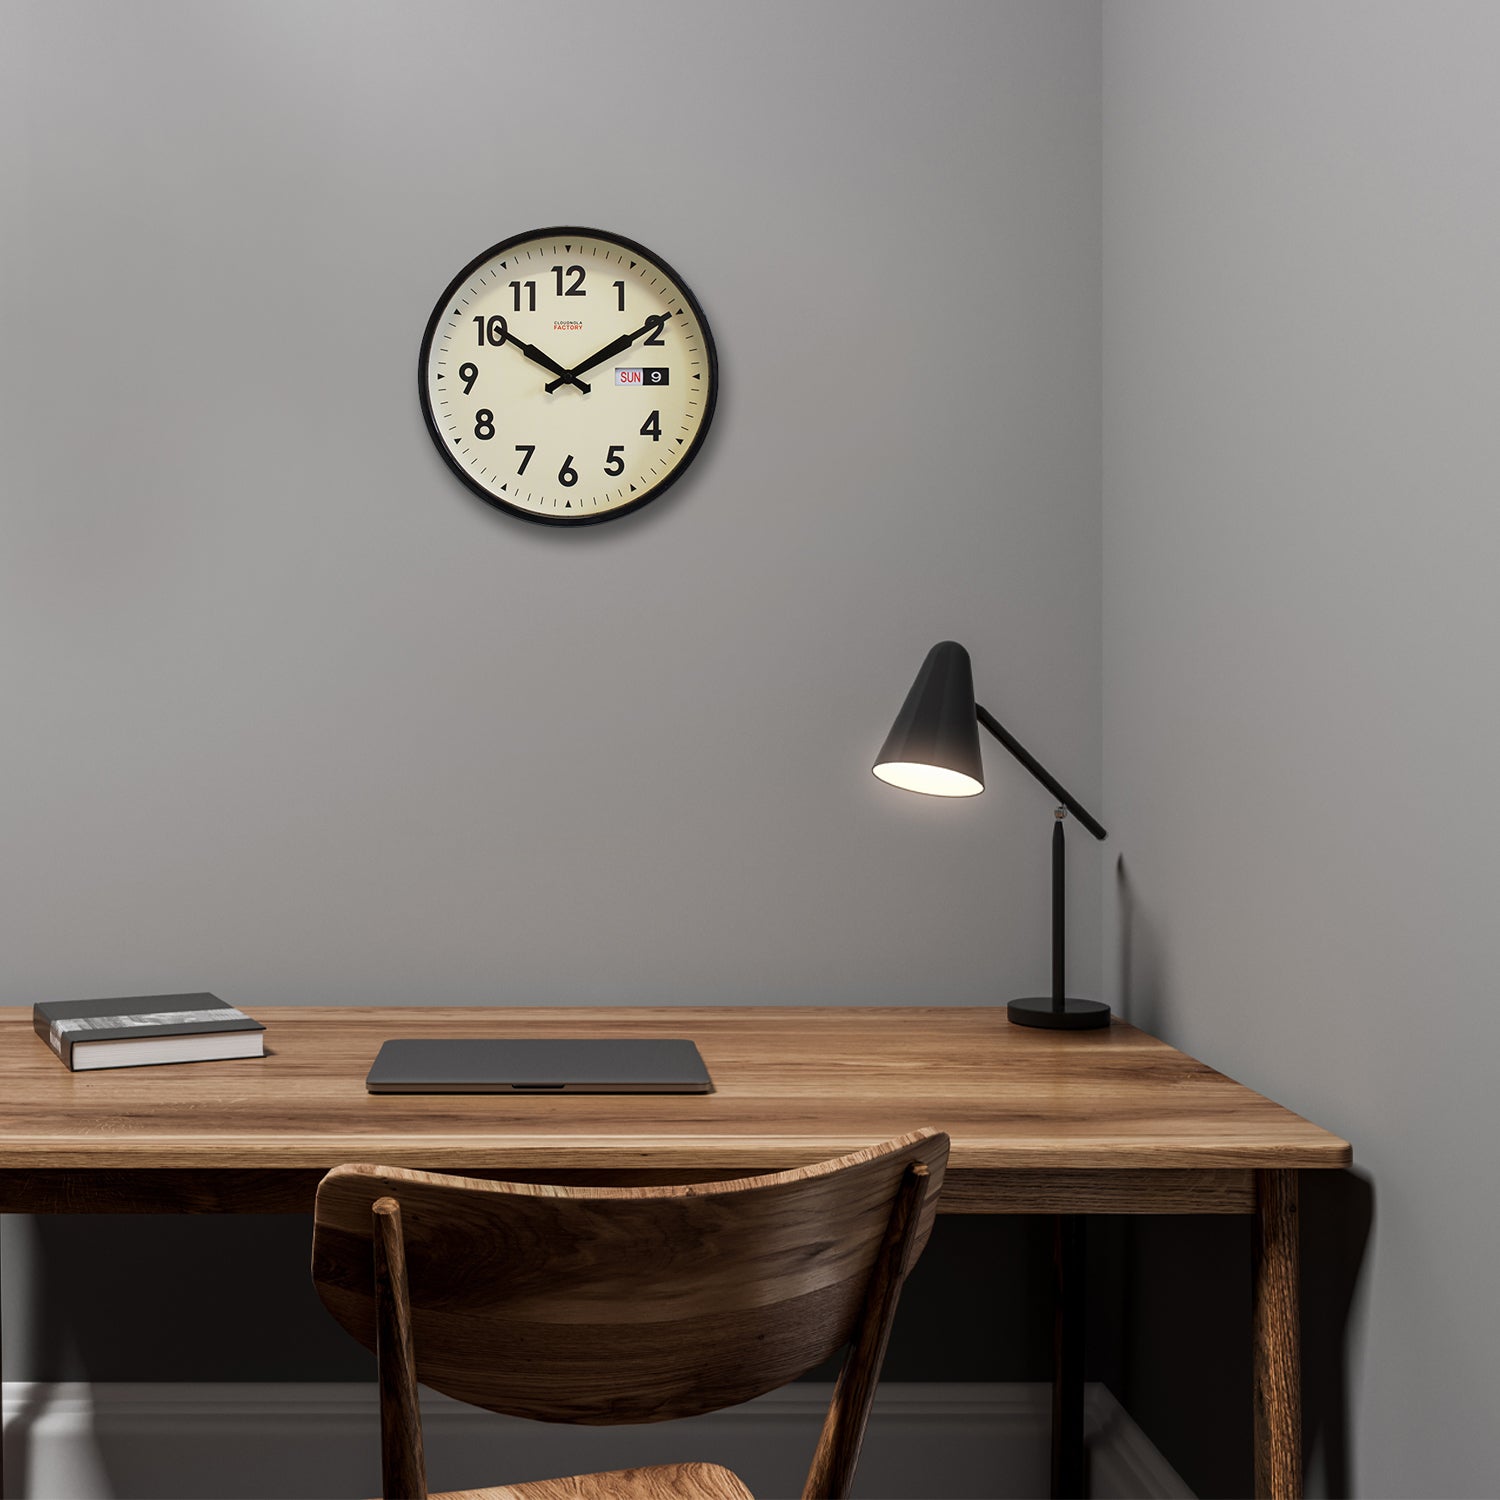 Cloudnola Factory Date Calendar Black Clock: Contemporary Design Meets  Day-to-Day Tracking.